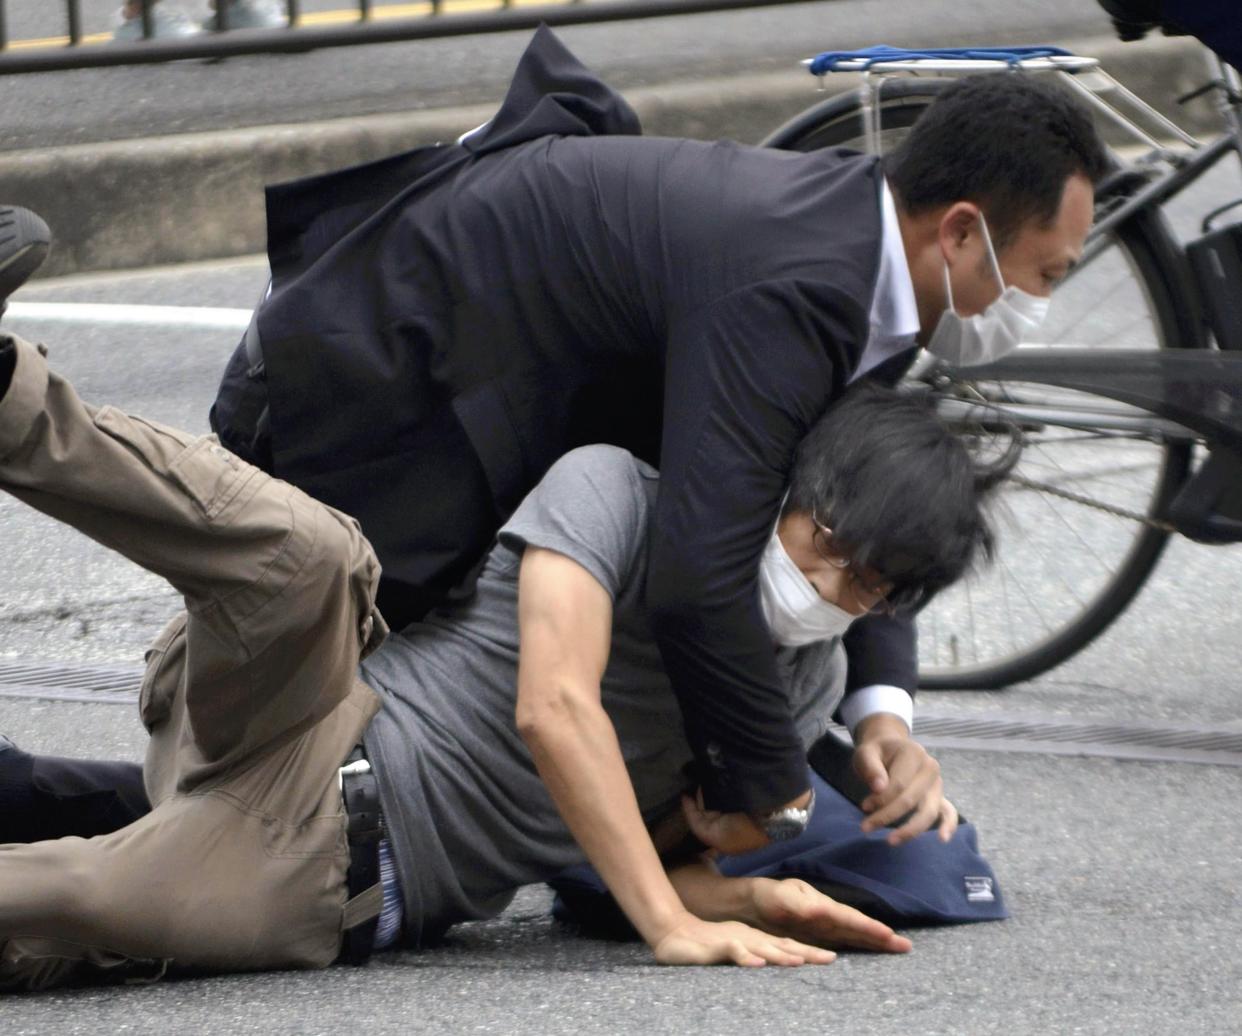 Tetsuya Yamagami, bottom, is detained after the shooting on Friday.